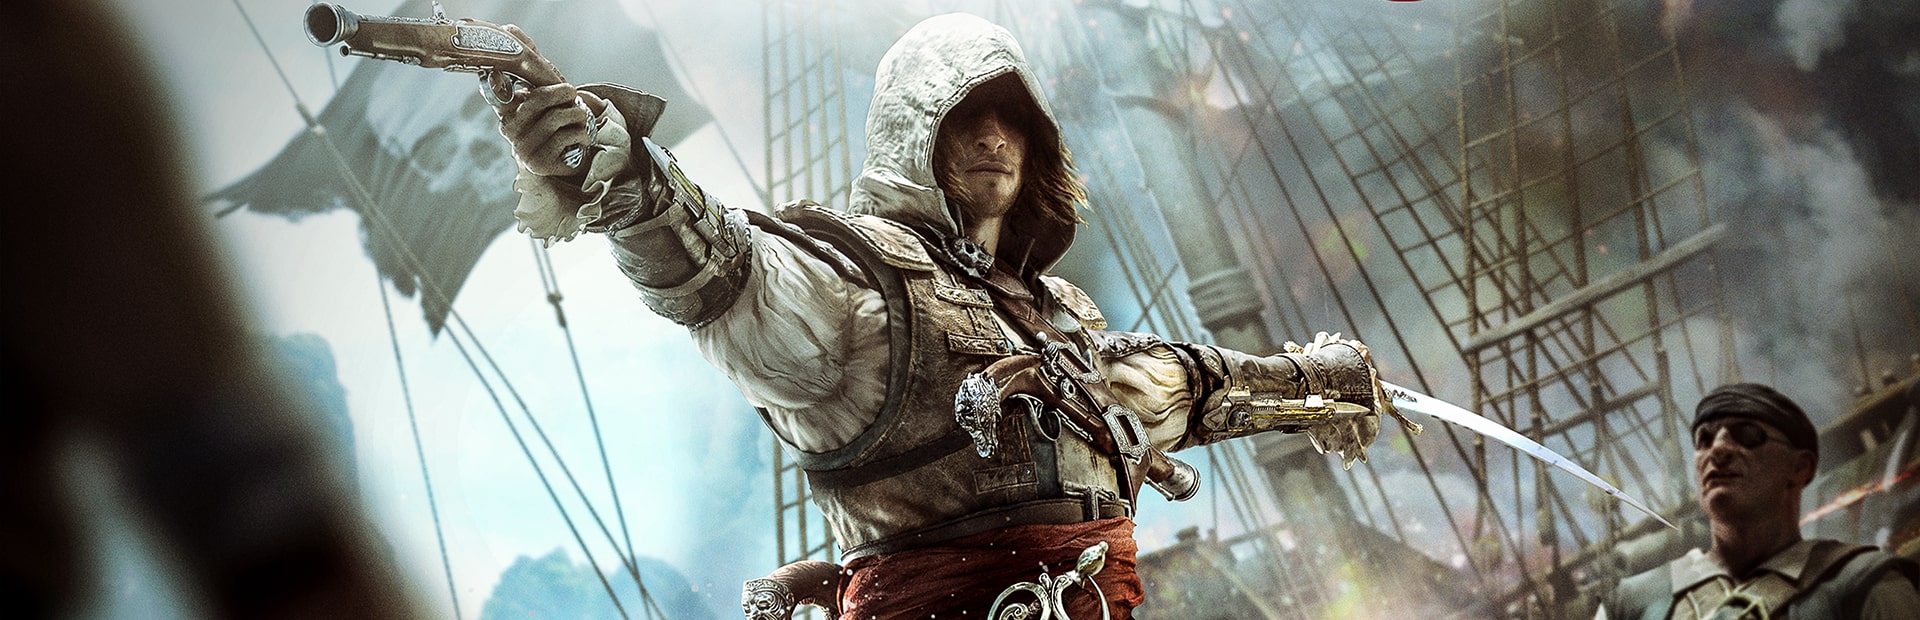 Assassin's Creed IV Black Flag for PC - Related Items